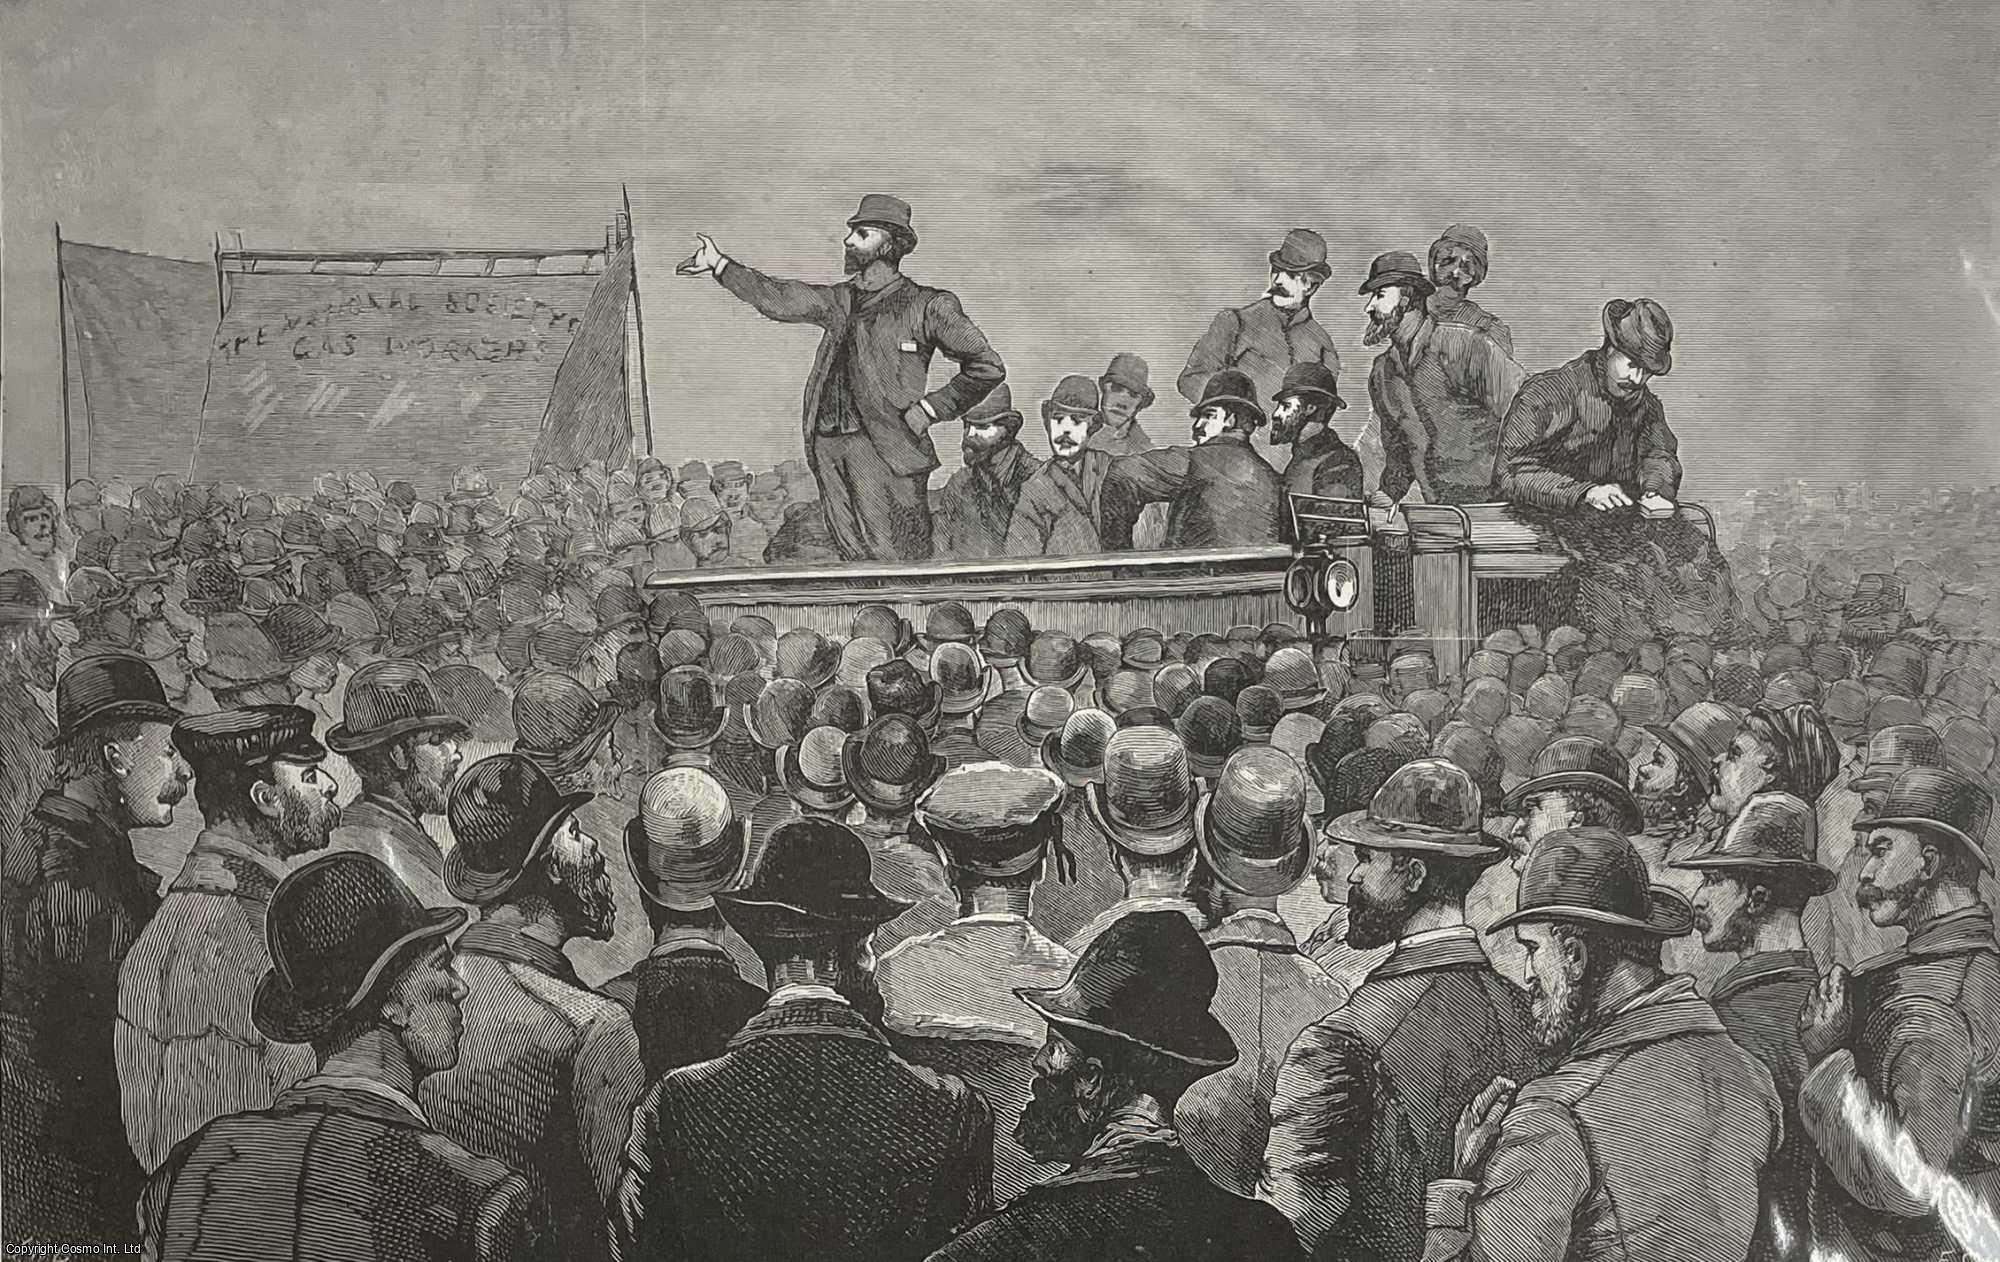 TRADE UNIONS - Gas Workers' Meeting at Peckham Rye, Sunday Dec 8th, 1889. An original print and article from the Illustrated London News, 1889.